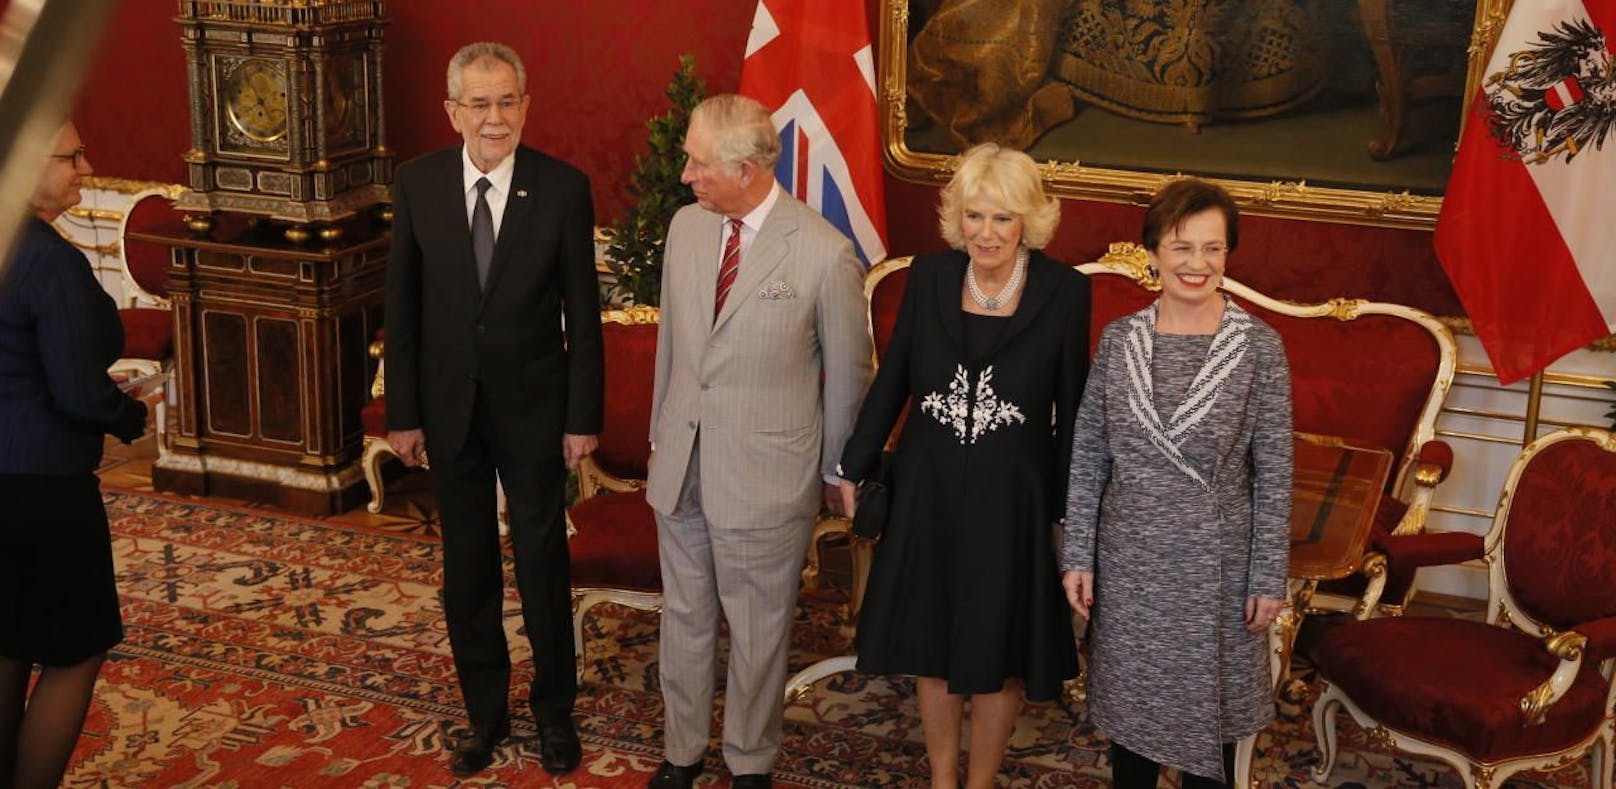 Charles & Camilla in Wien: Doch Handshakes an Tag 1